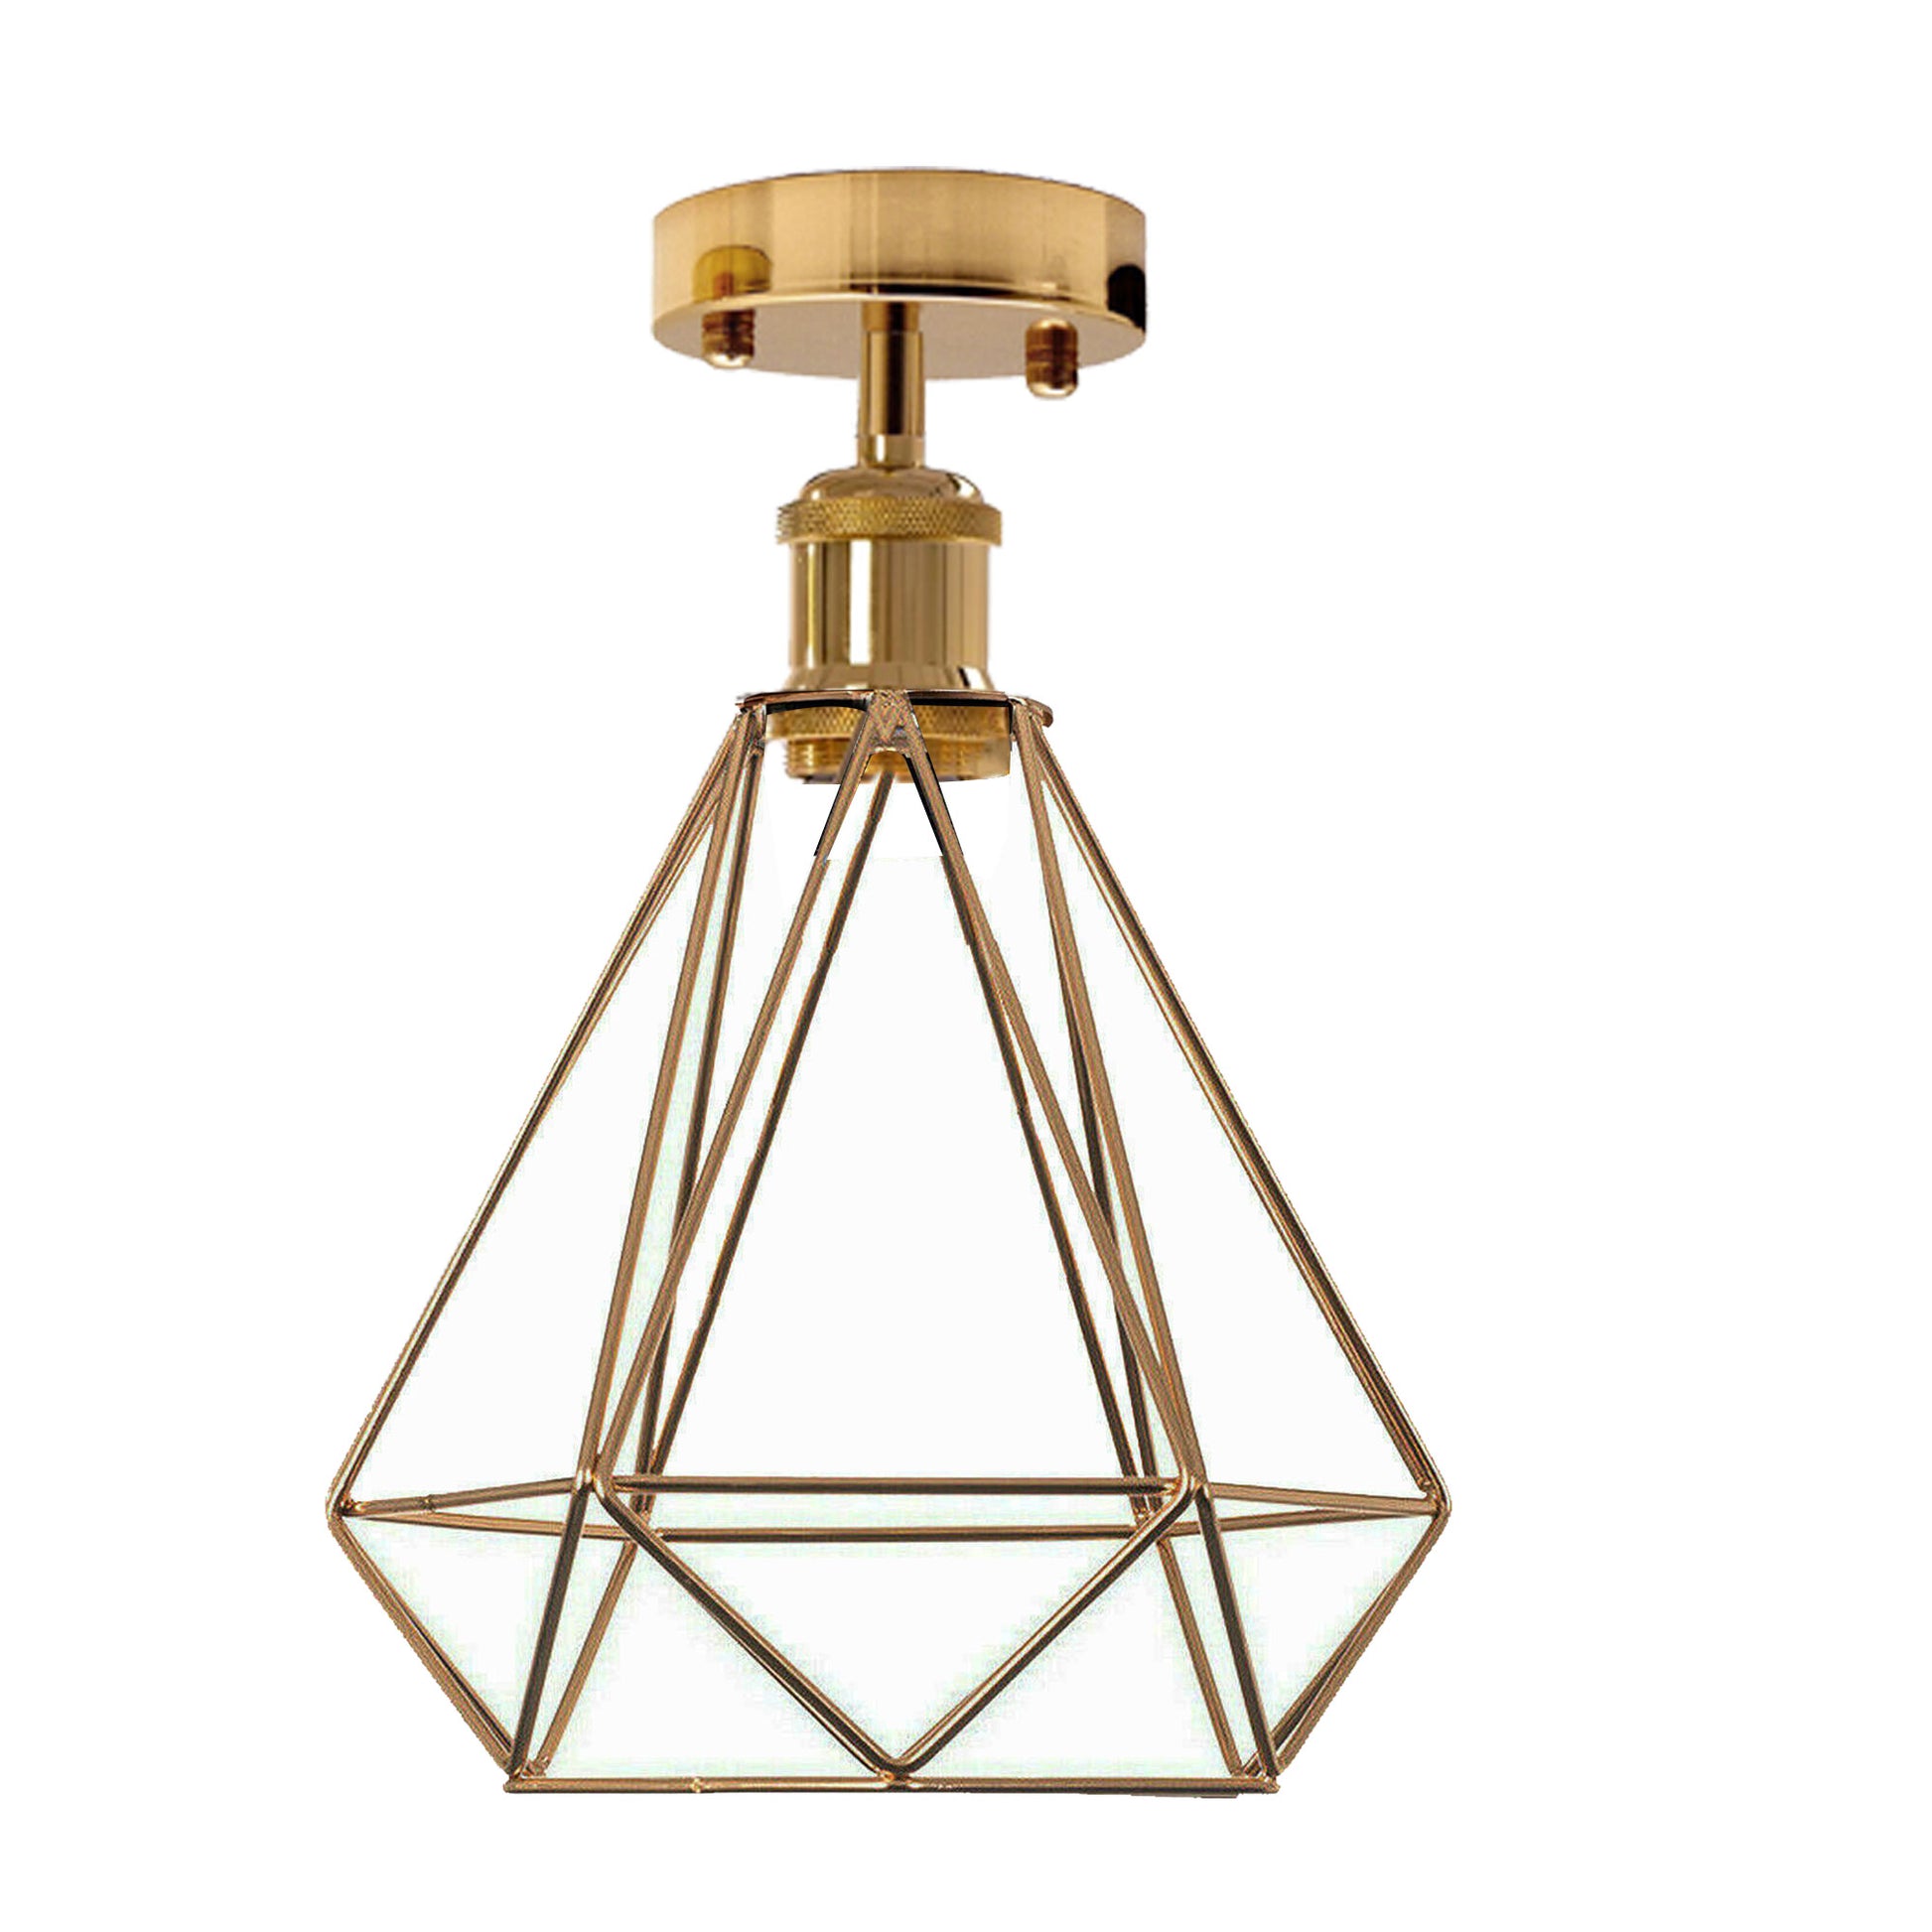 Vintage Gold Flush Mount Ceiling Light Fixture Metal Cage Ceiling Lampshade with E27 Holder for Living Room Kitchen Bedroom Hallway Courtyard